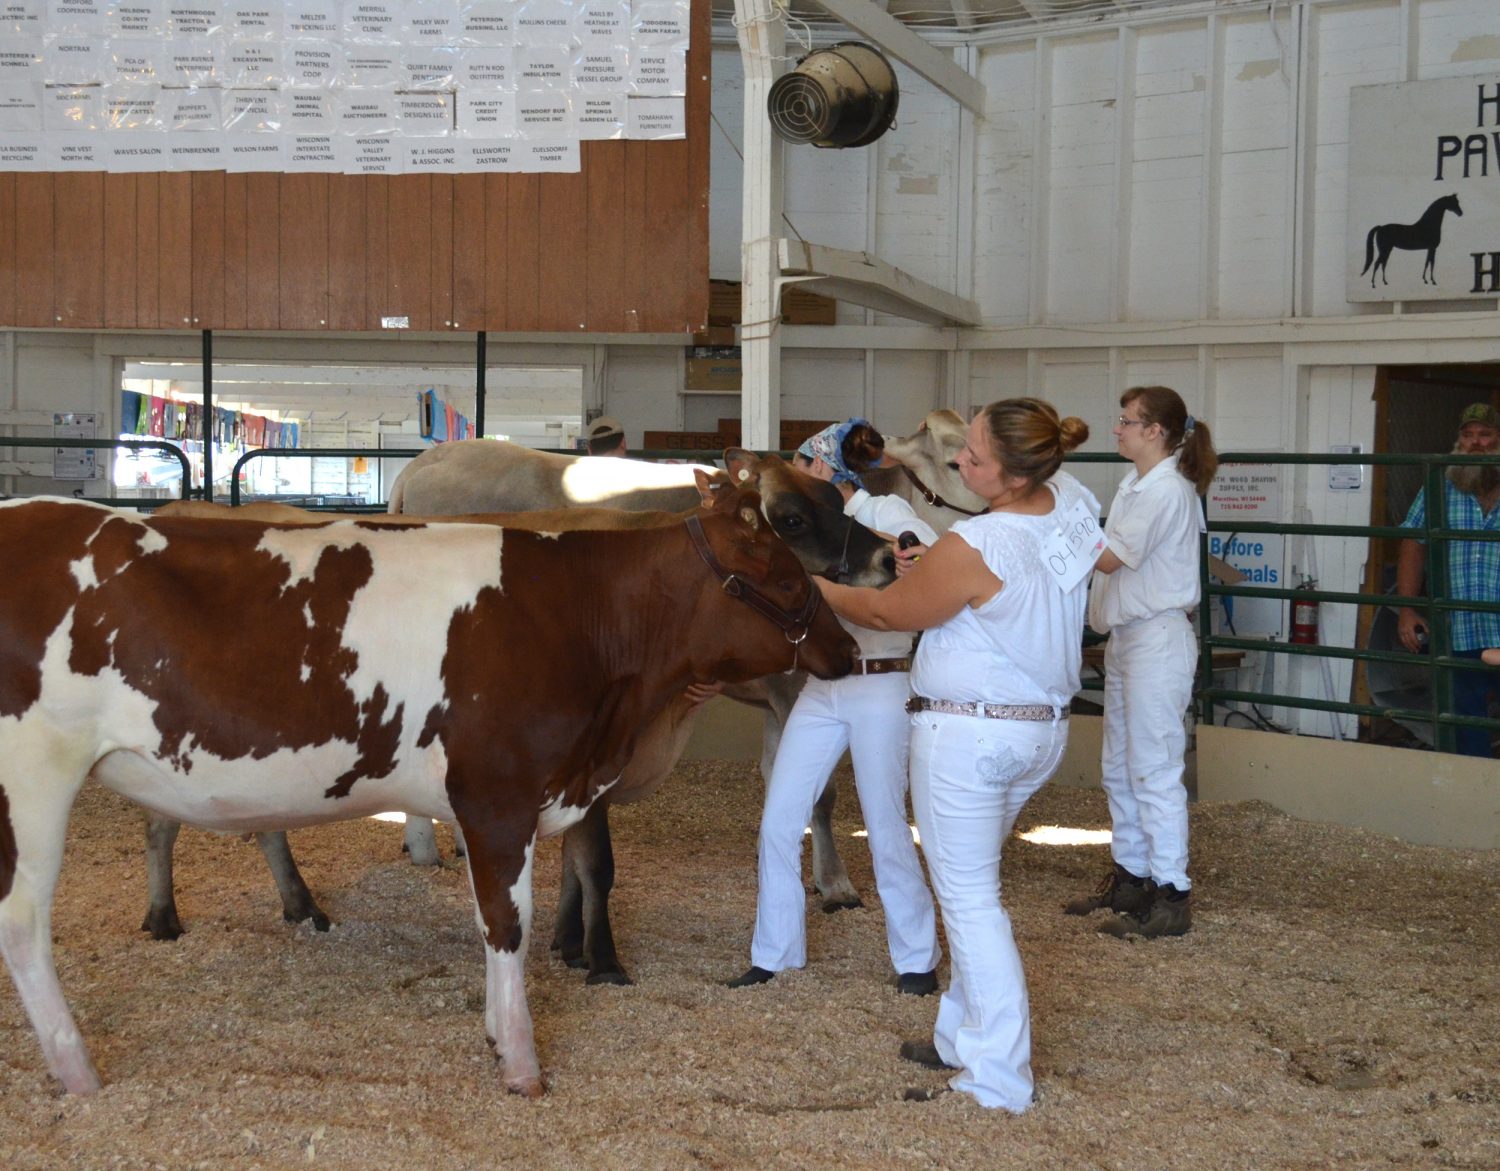 Lincoln County Fair 2016 judging results